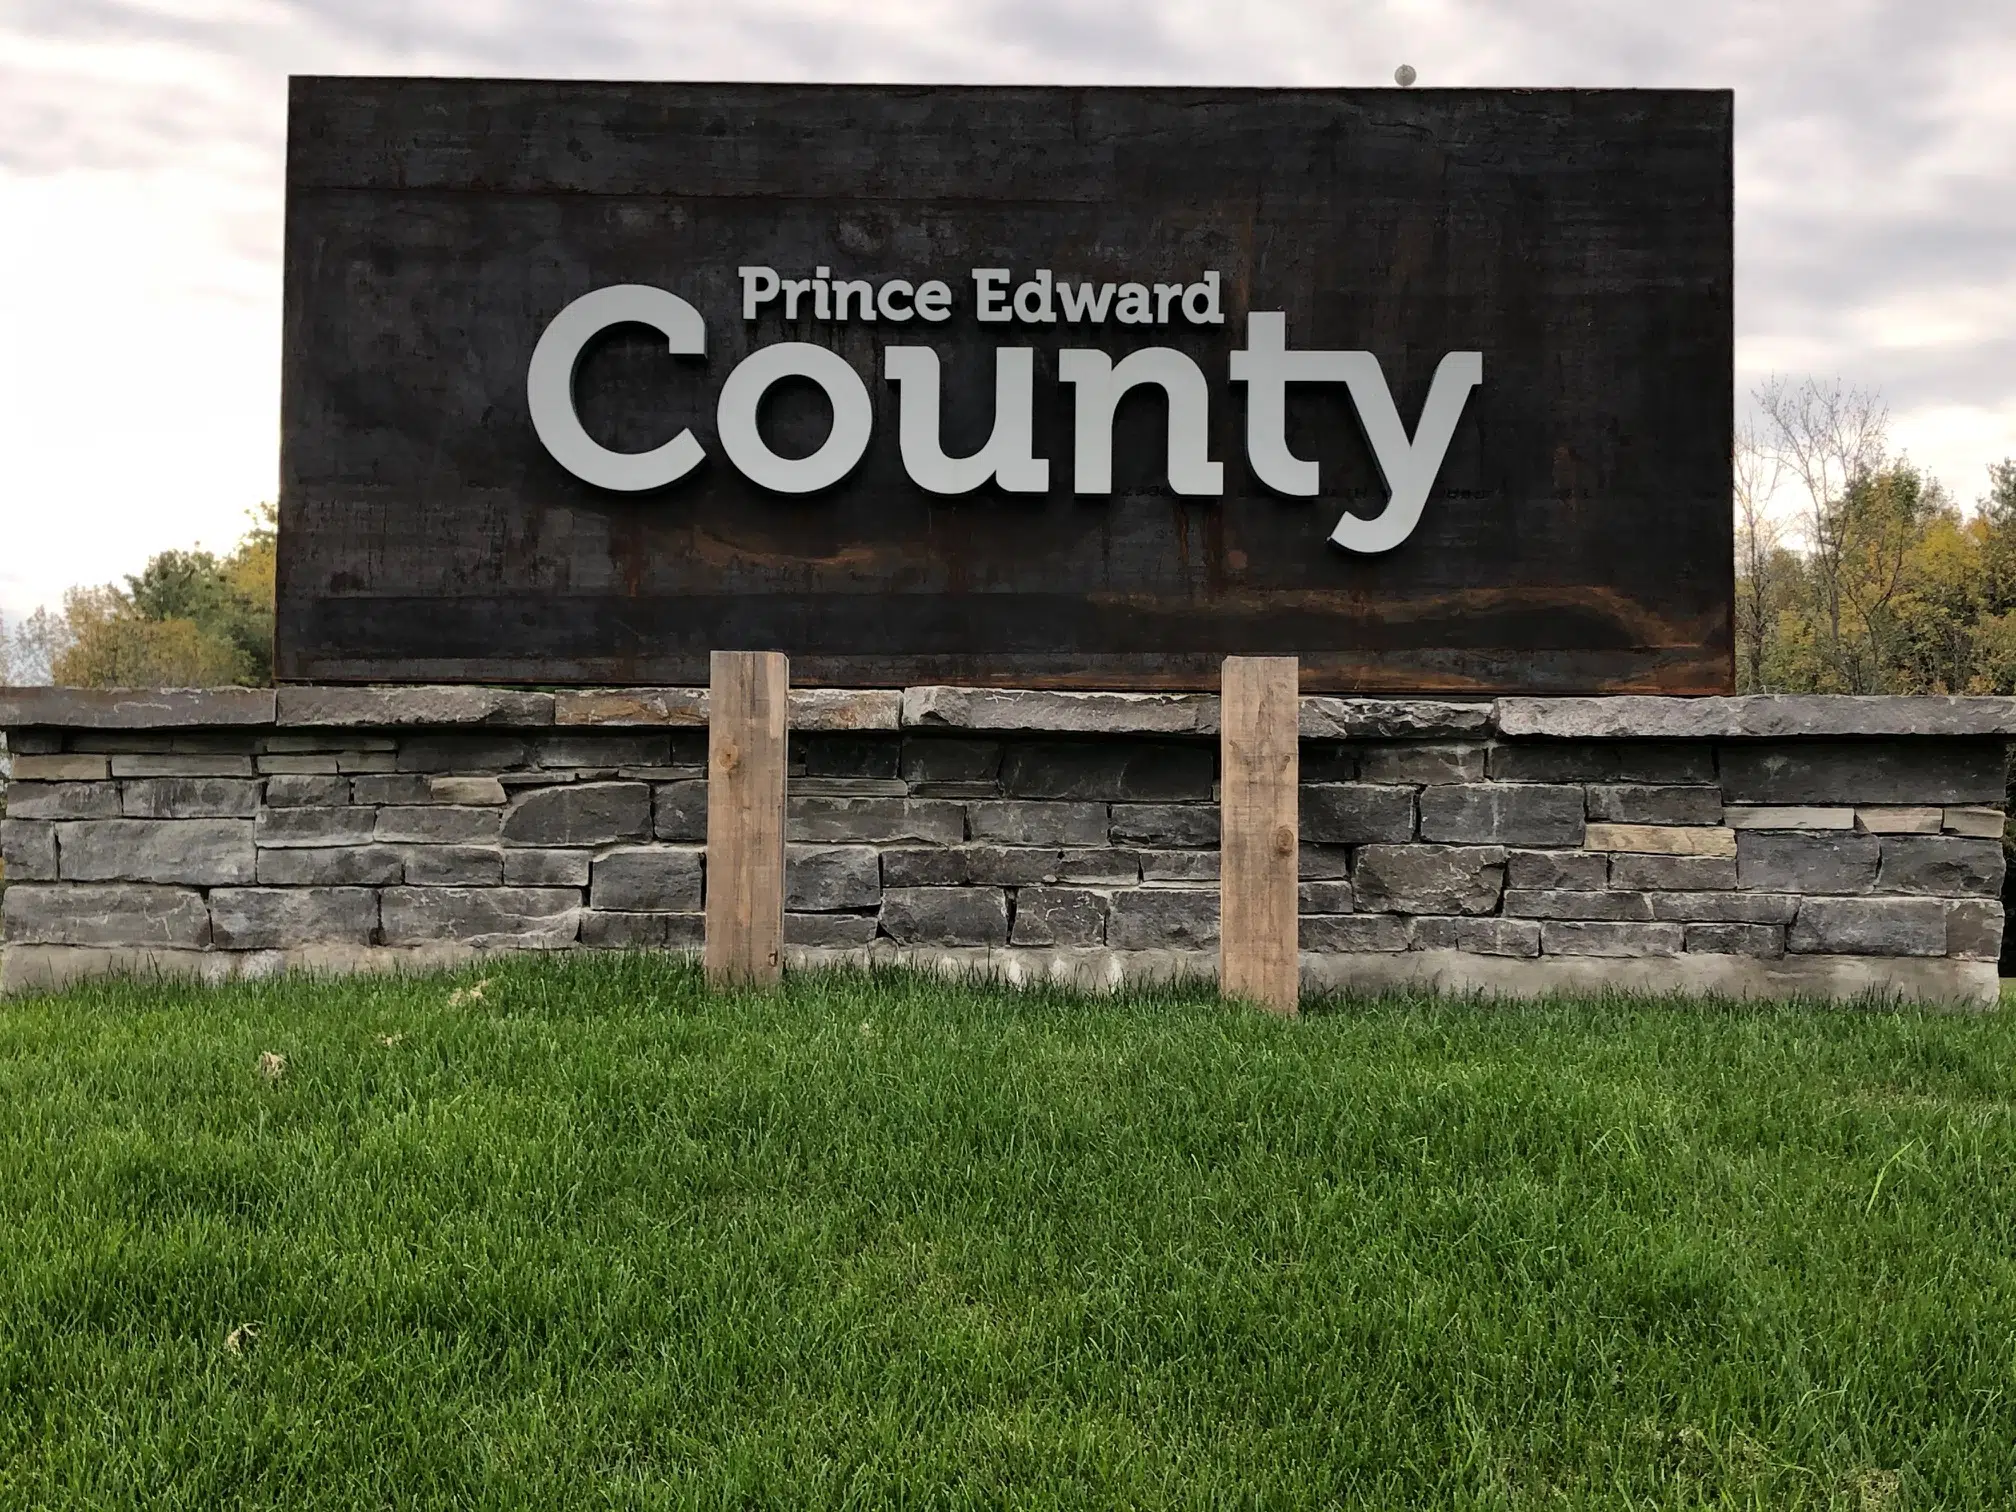 Prince Edward County council fields multiple suggestions for Short-Term Accommodation licencing program